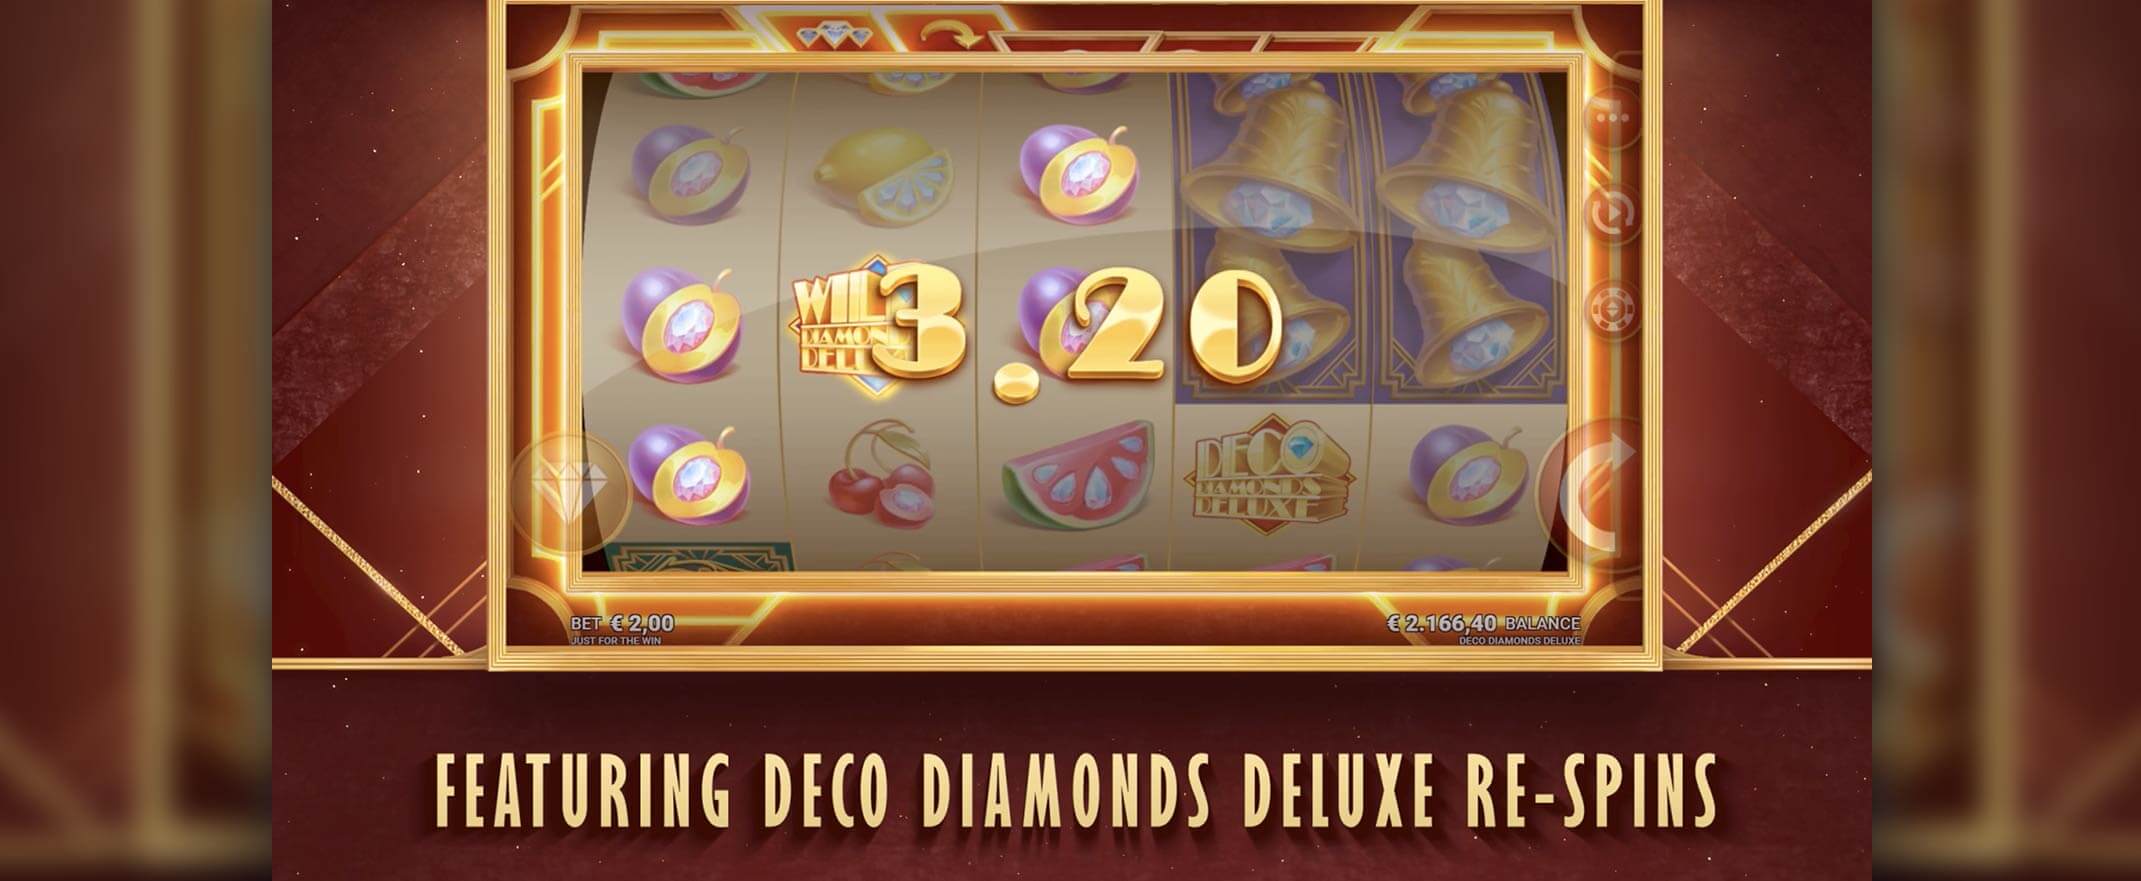 Deco Diamonds Deluxe slot by Just For The Win & Microgaming